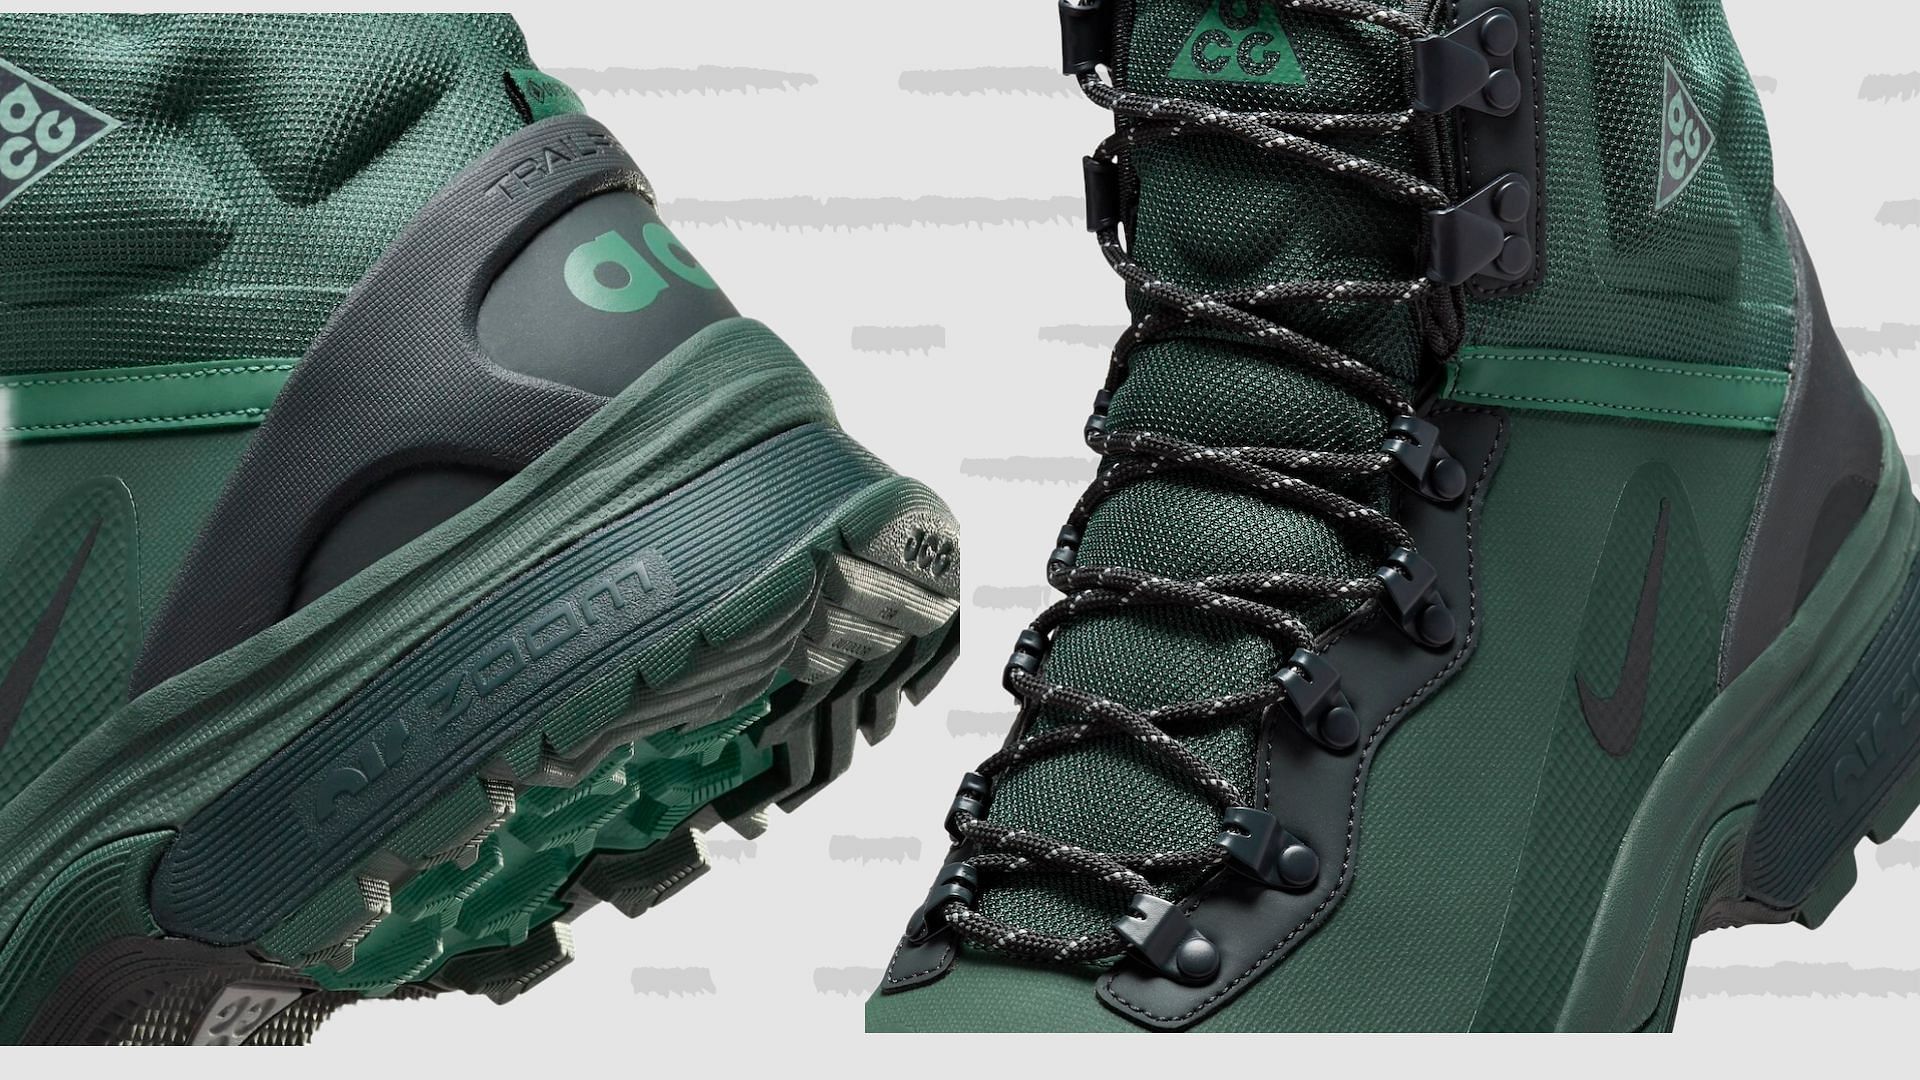 A closer look at the upcoming Nike ACG sneakers ( Image via Nike)